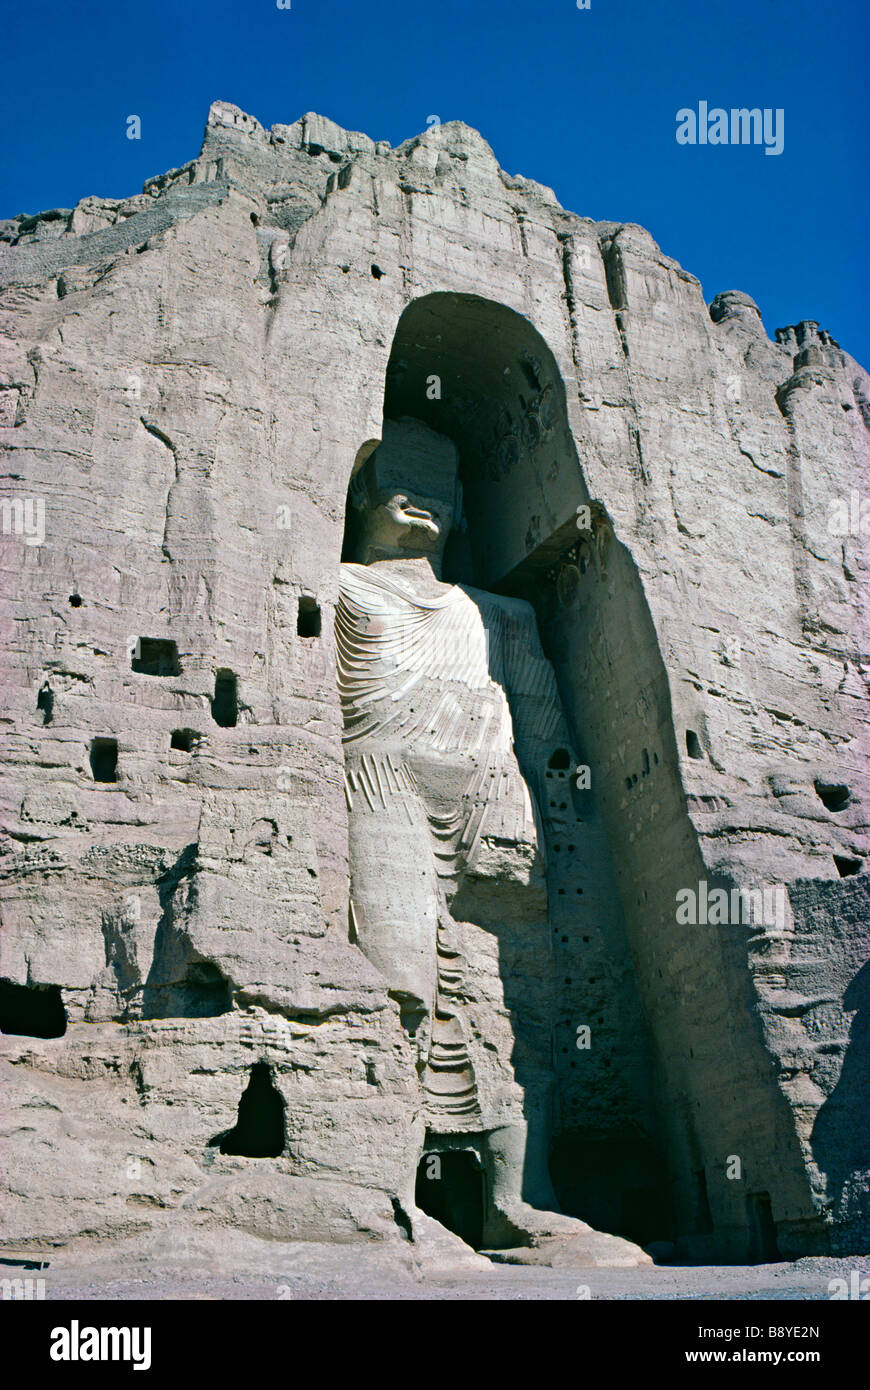 The larger of the two giant Buddhas of Bamiyan, Afghanistan, (built in 554) seen in 1974 before its destruction by the Taliban in 2001 Stock Photo